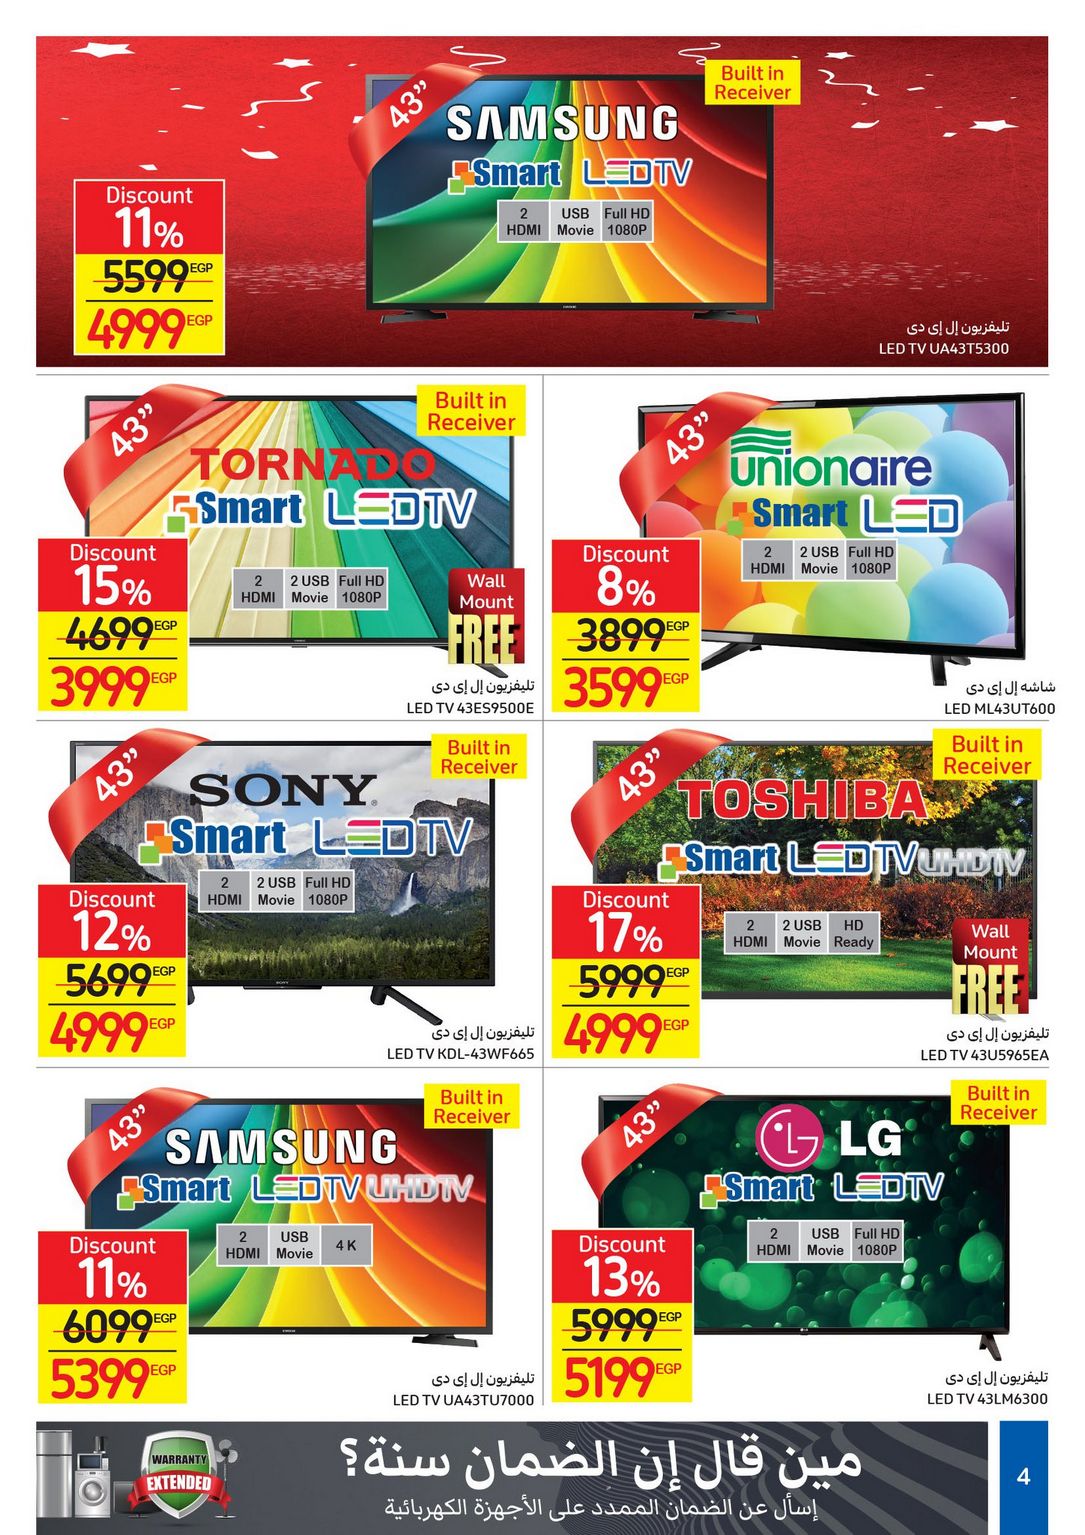 Carrefour Anniversary Offers till 18/2/2021 | Carrefour Egypt 5